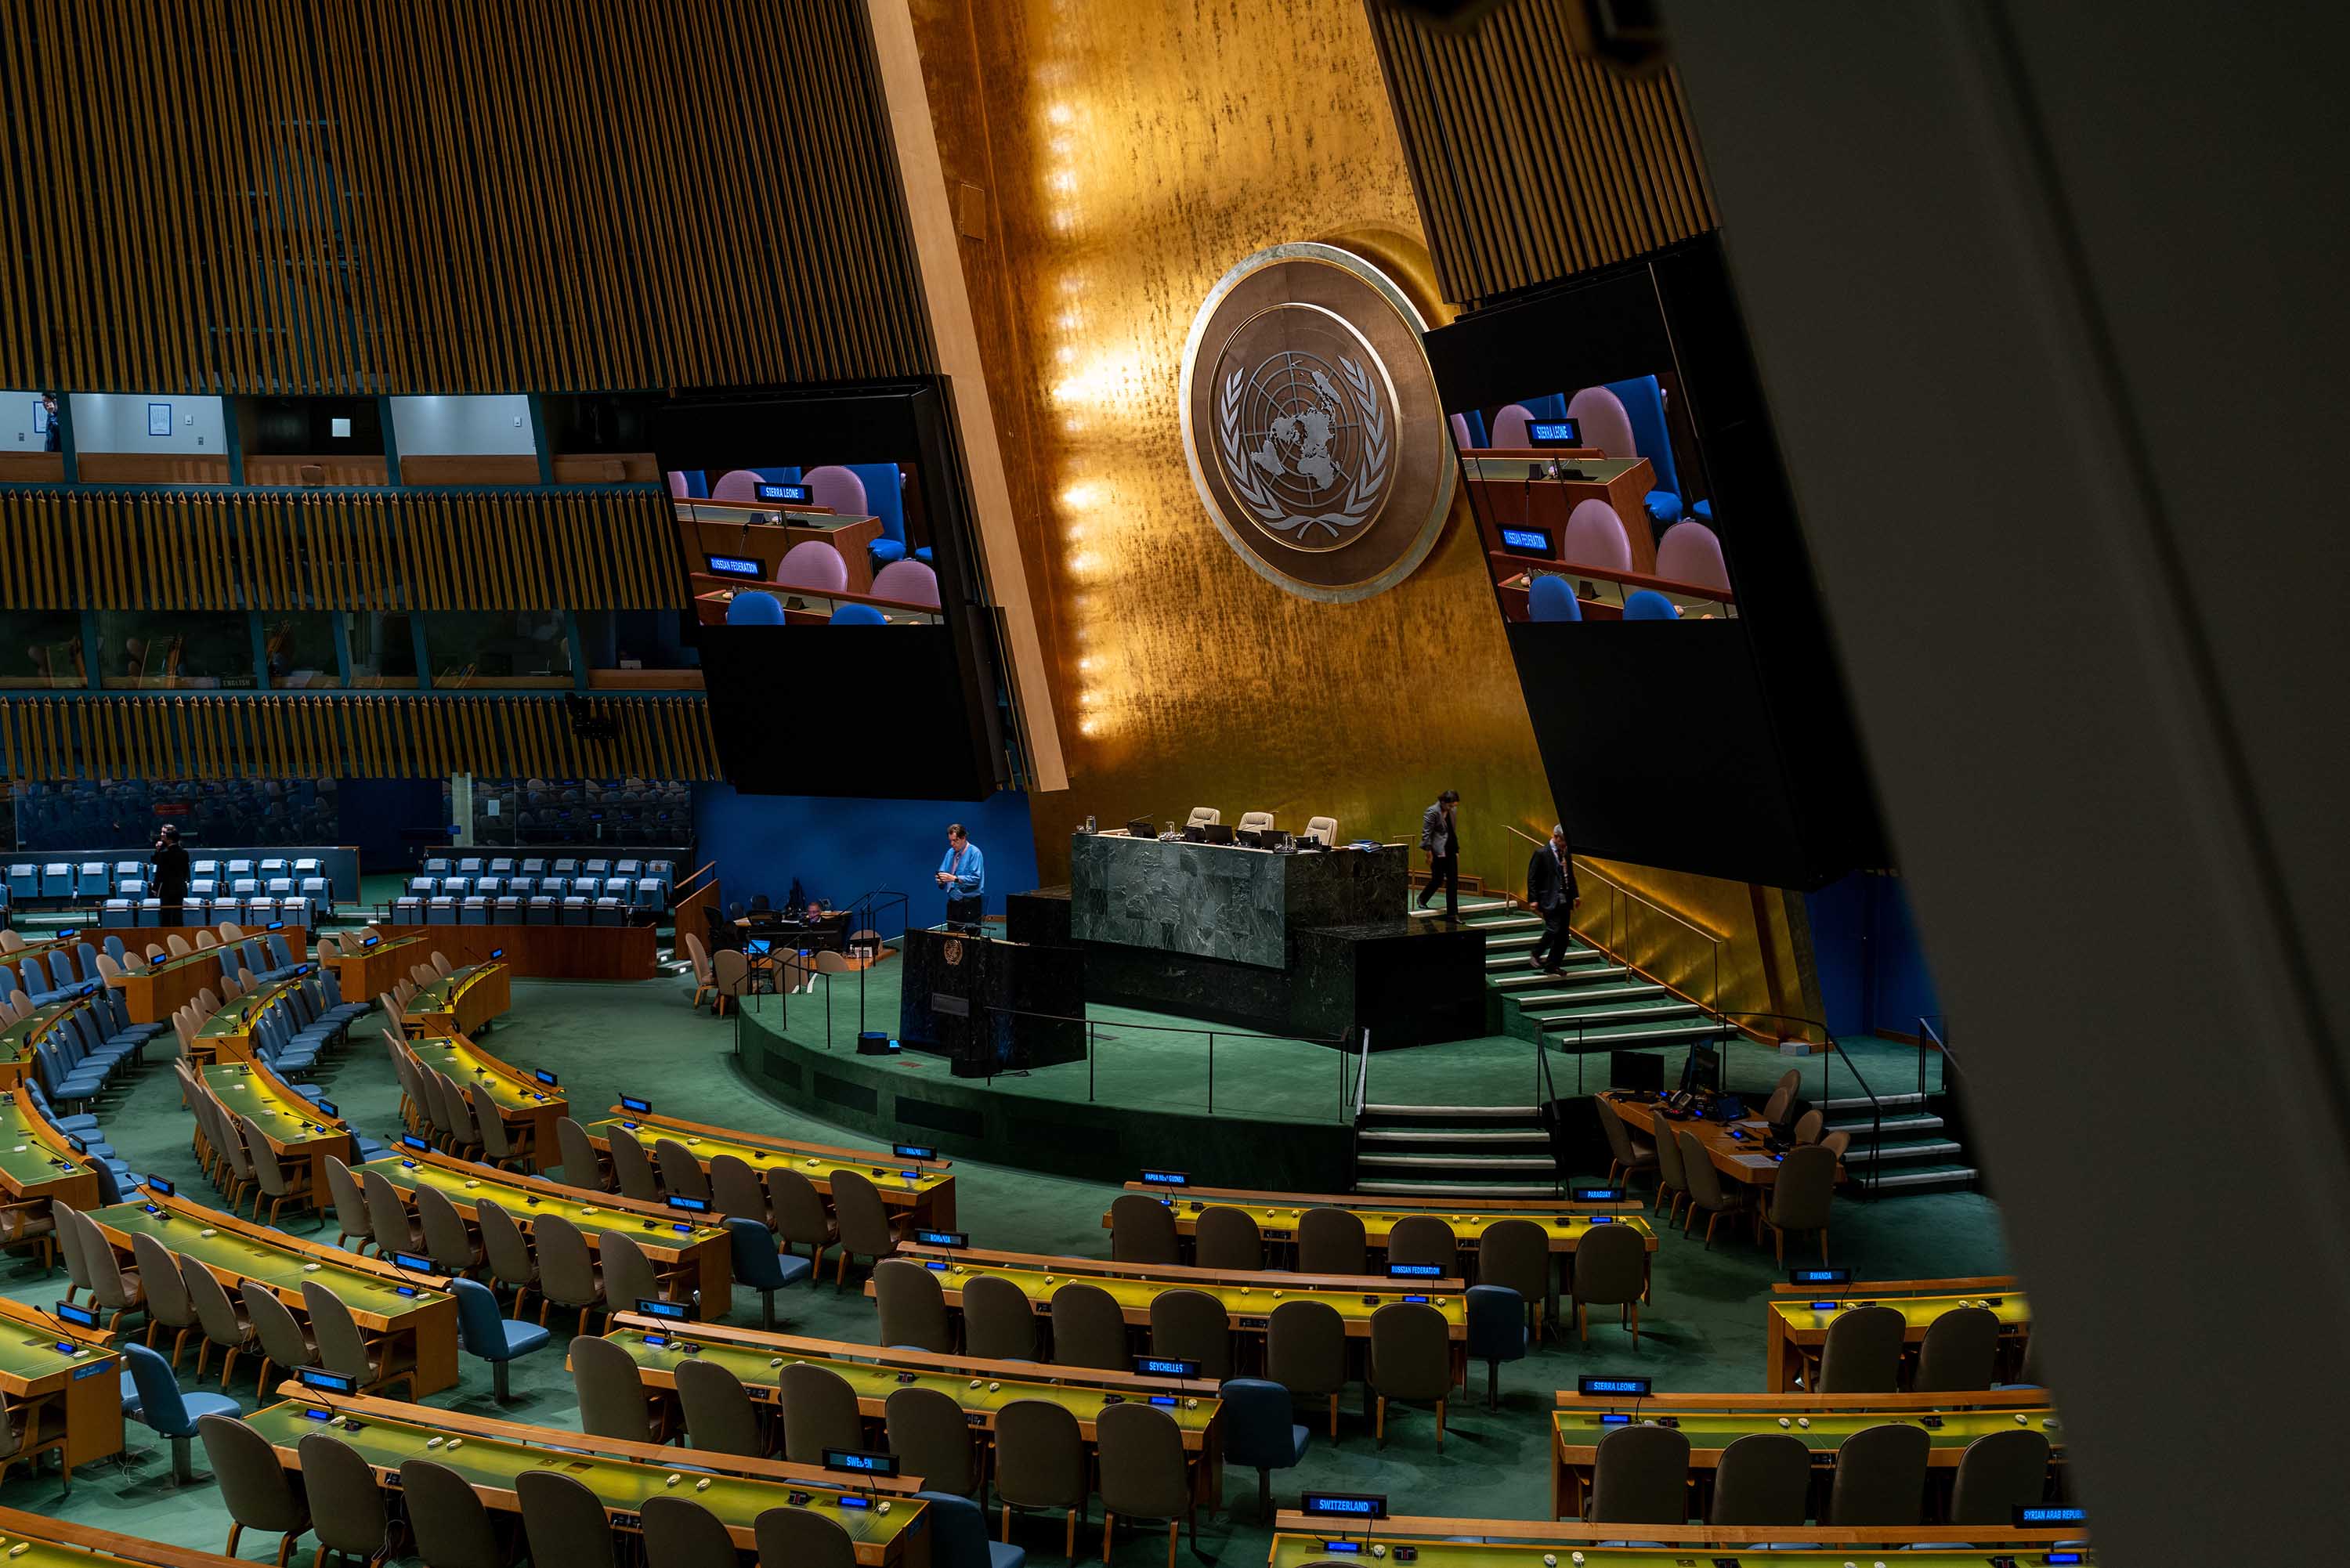 Final preparations are made before the start of the United Nations General Assembly on September 19, in New York City.